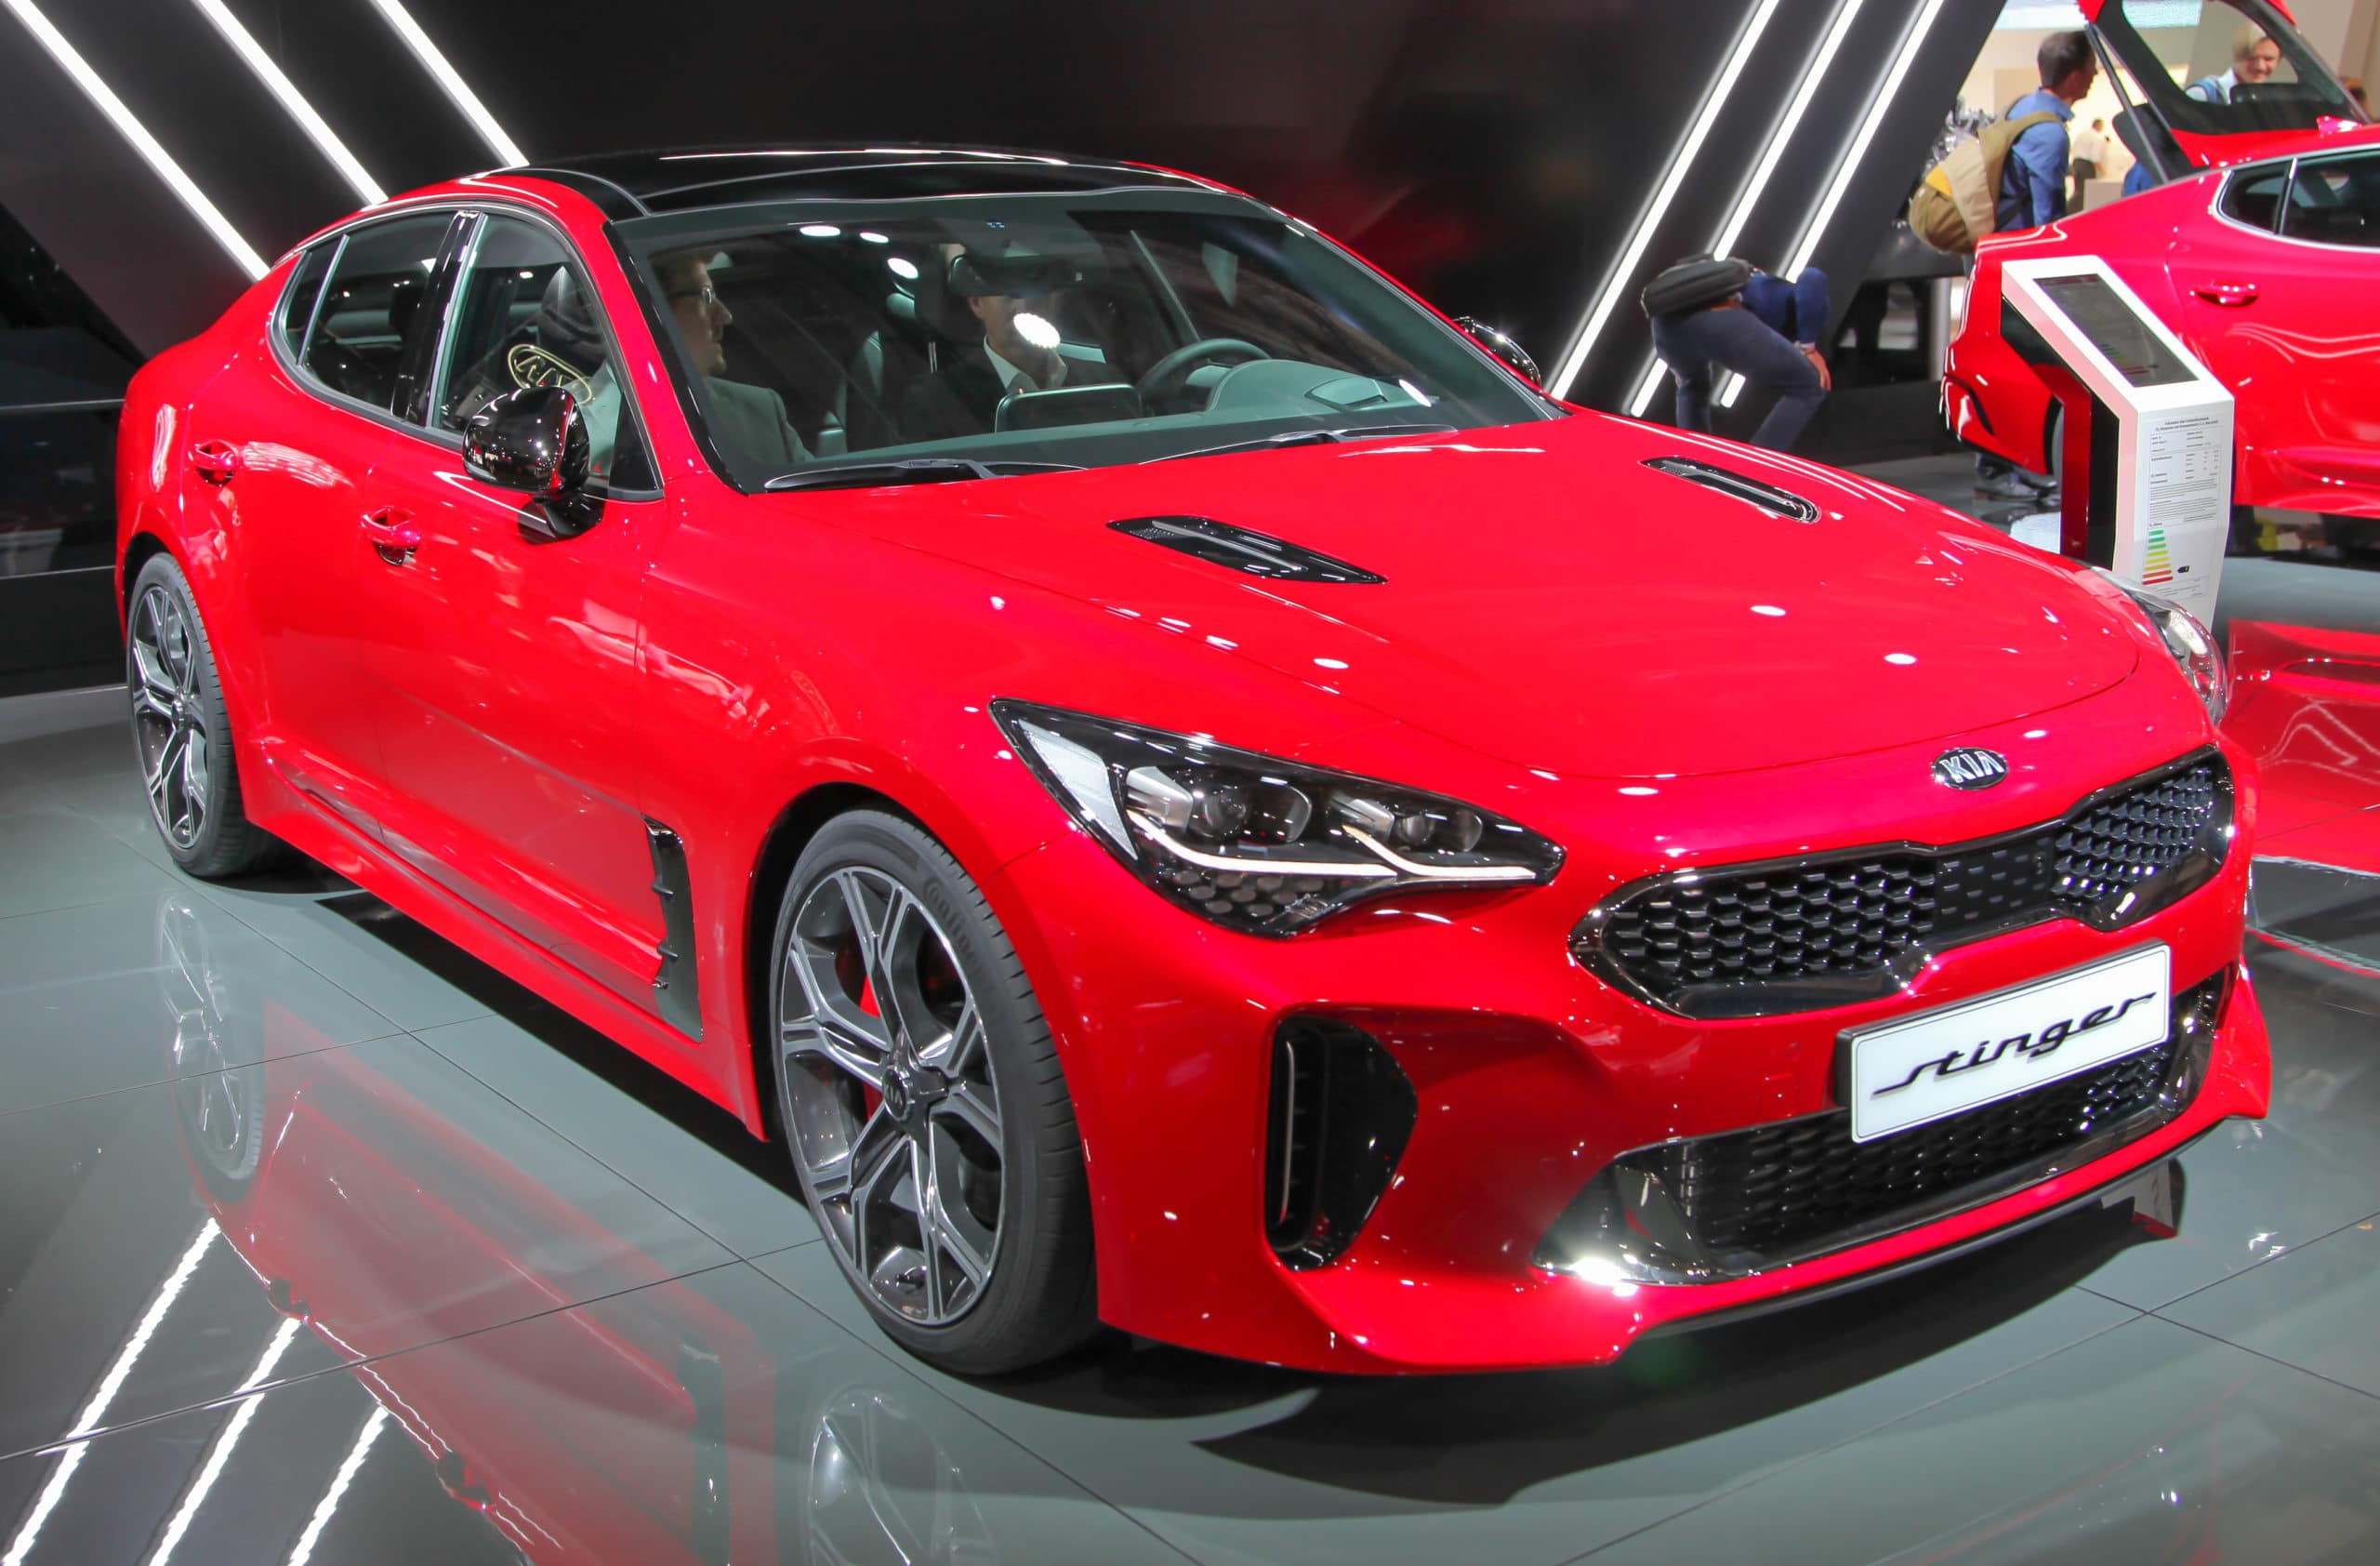 The Best Kia Stinger Exhaust Systems Of 2020 - Project Car Life